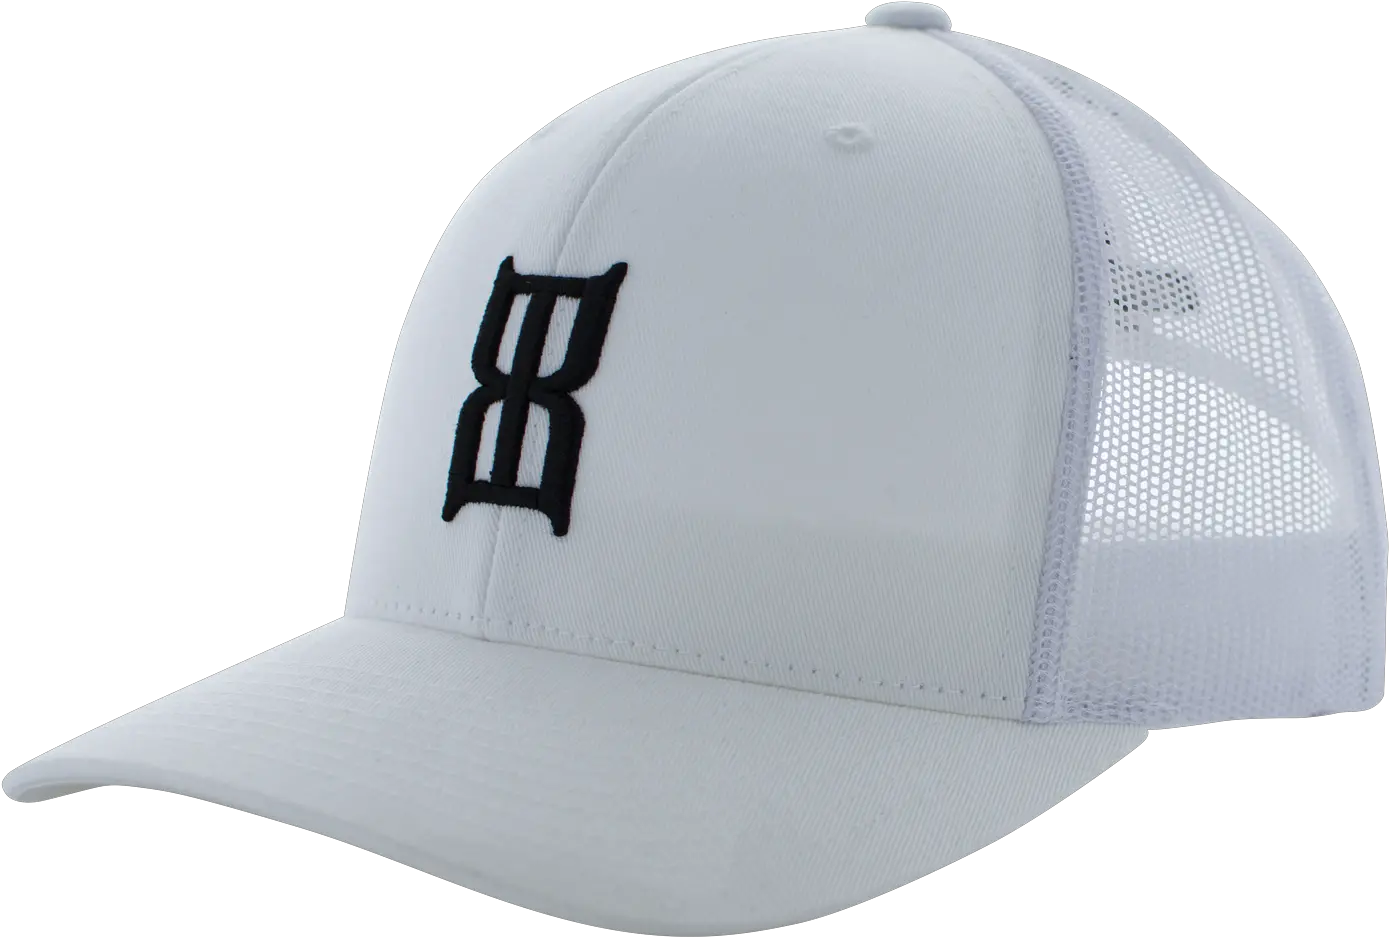 Download Bex White Mesh Bex Hats Full Size Png Image Baseball Cap Hats Png